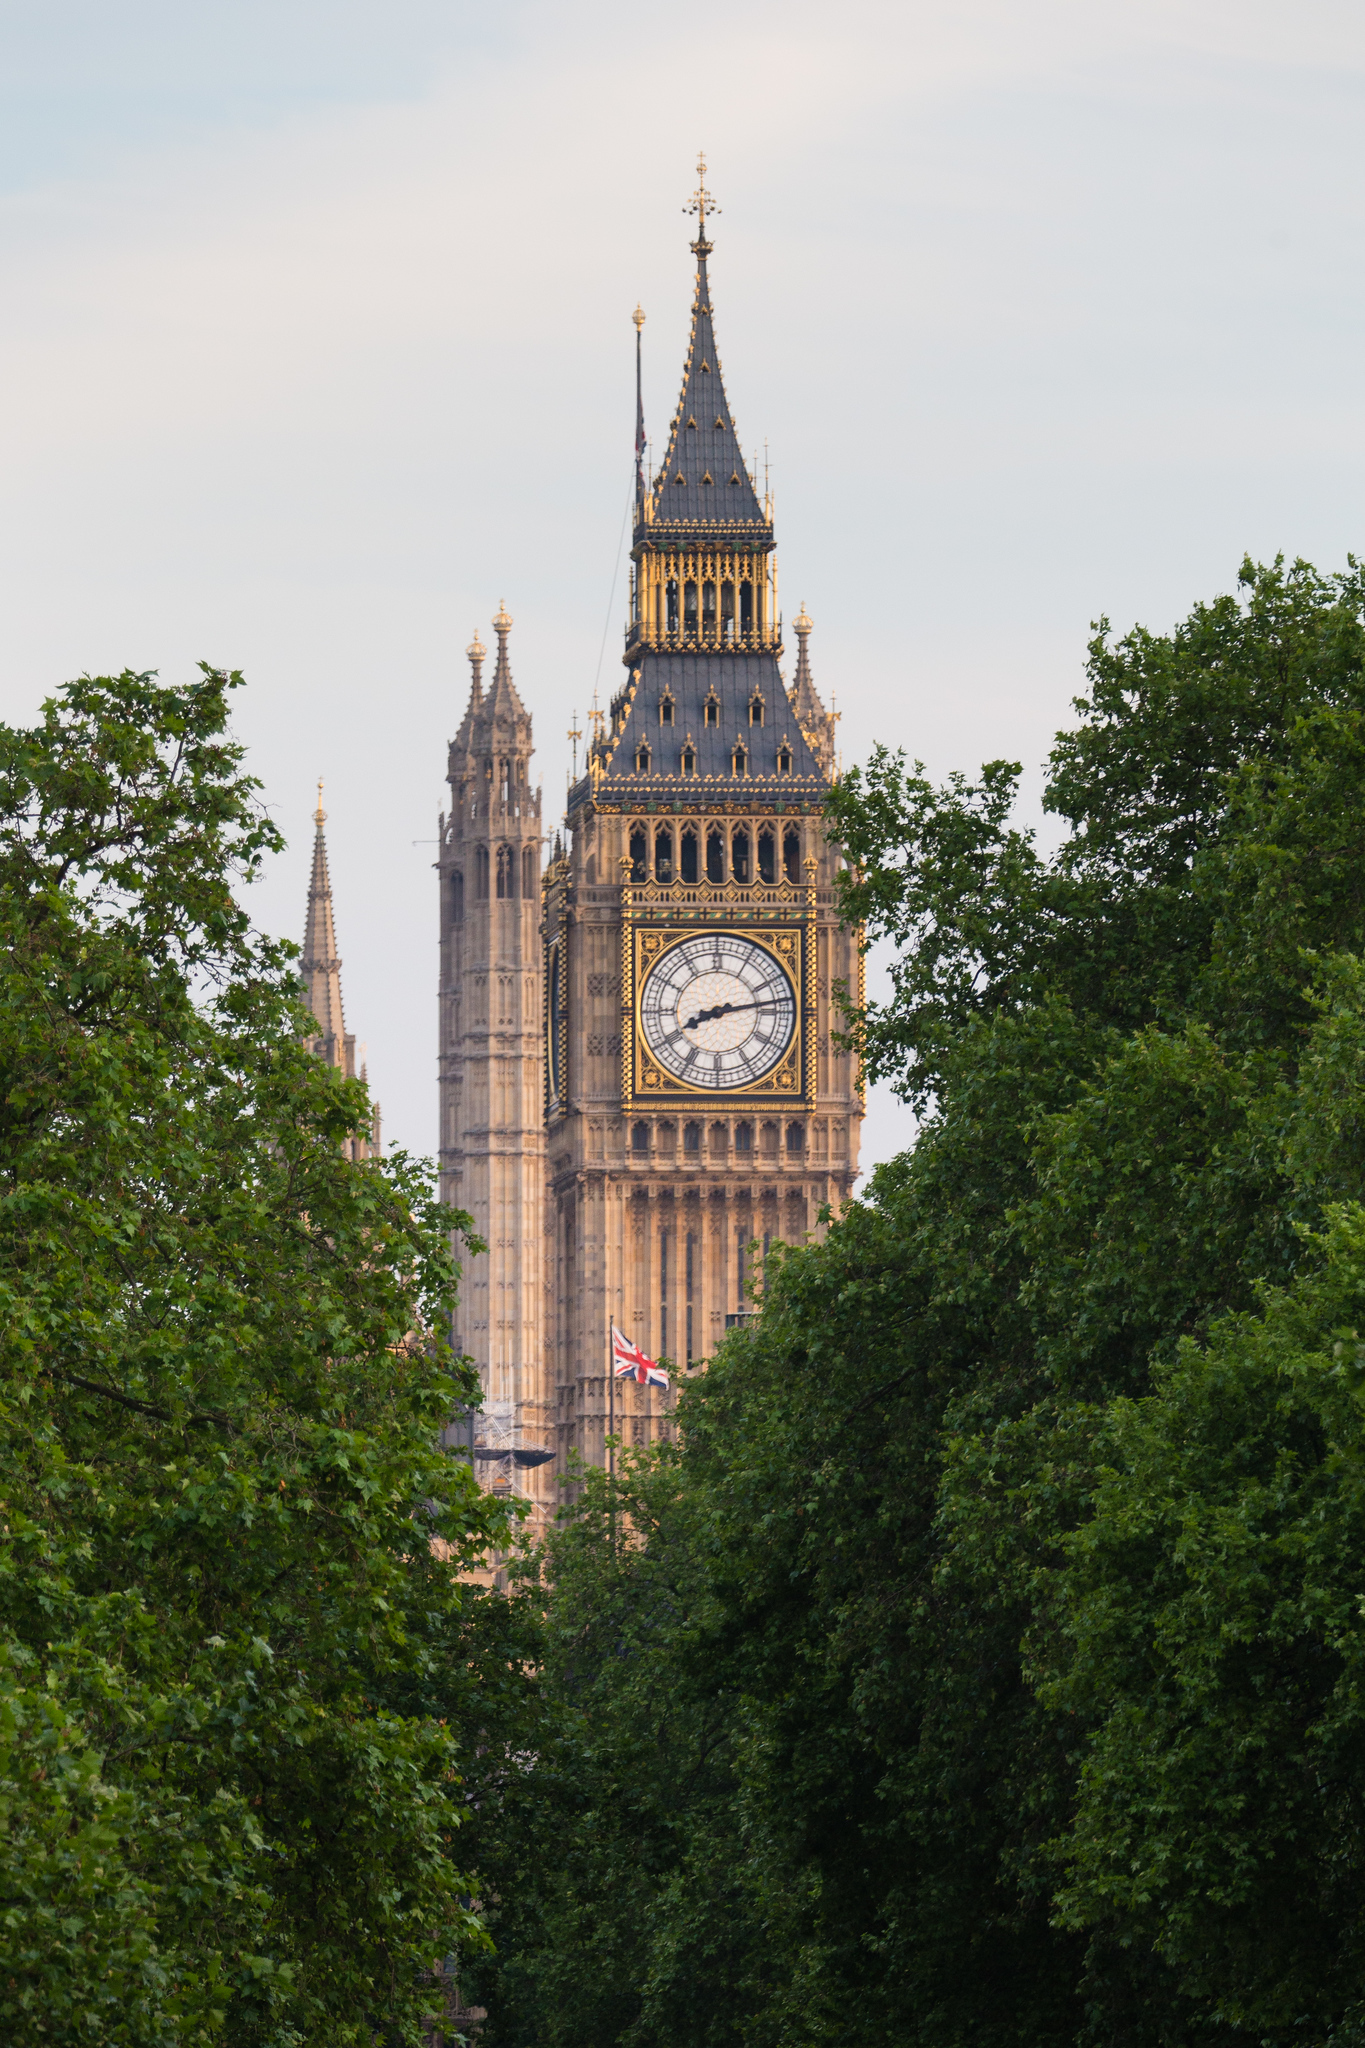 10 things we bet you didn't know about Big Ben